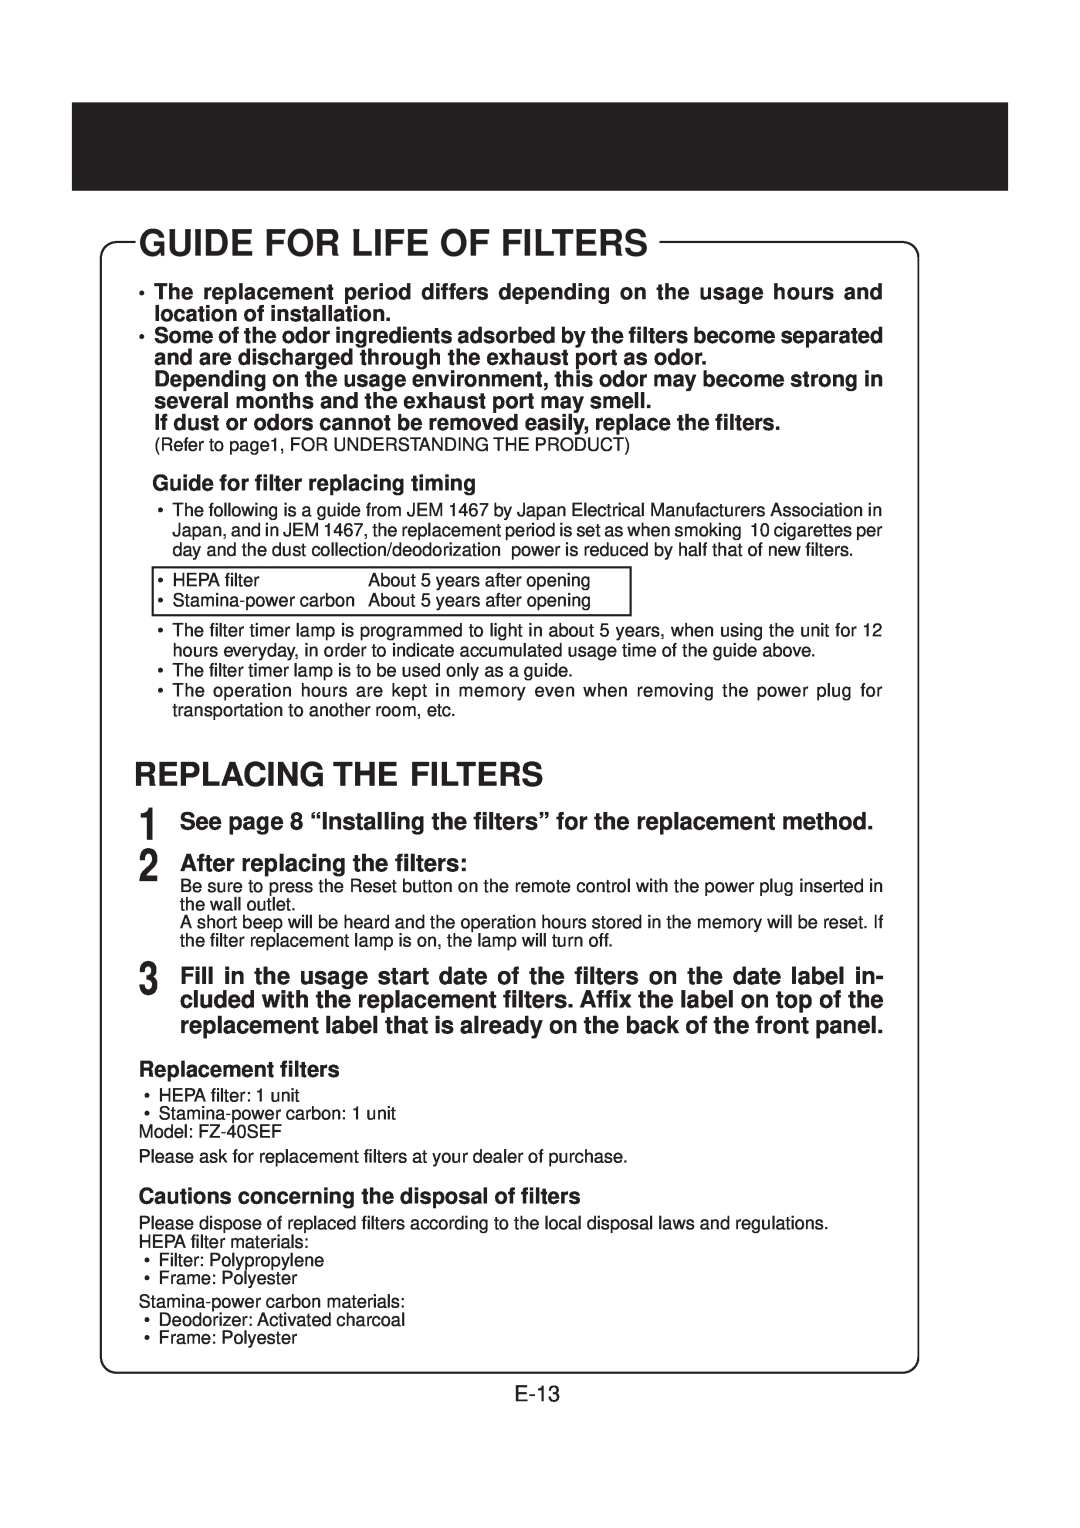 Sharp FU-40SE-K operation manual Guide For Life Of Filters, Replacing The Filters, After replacing the filters 